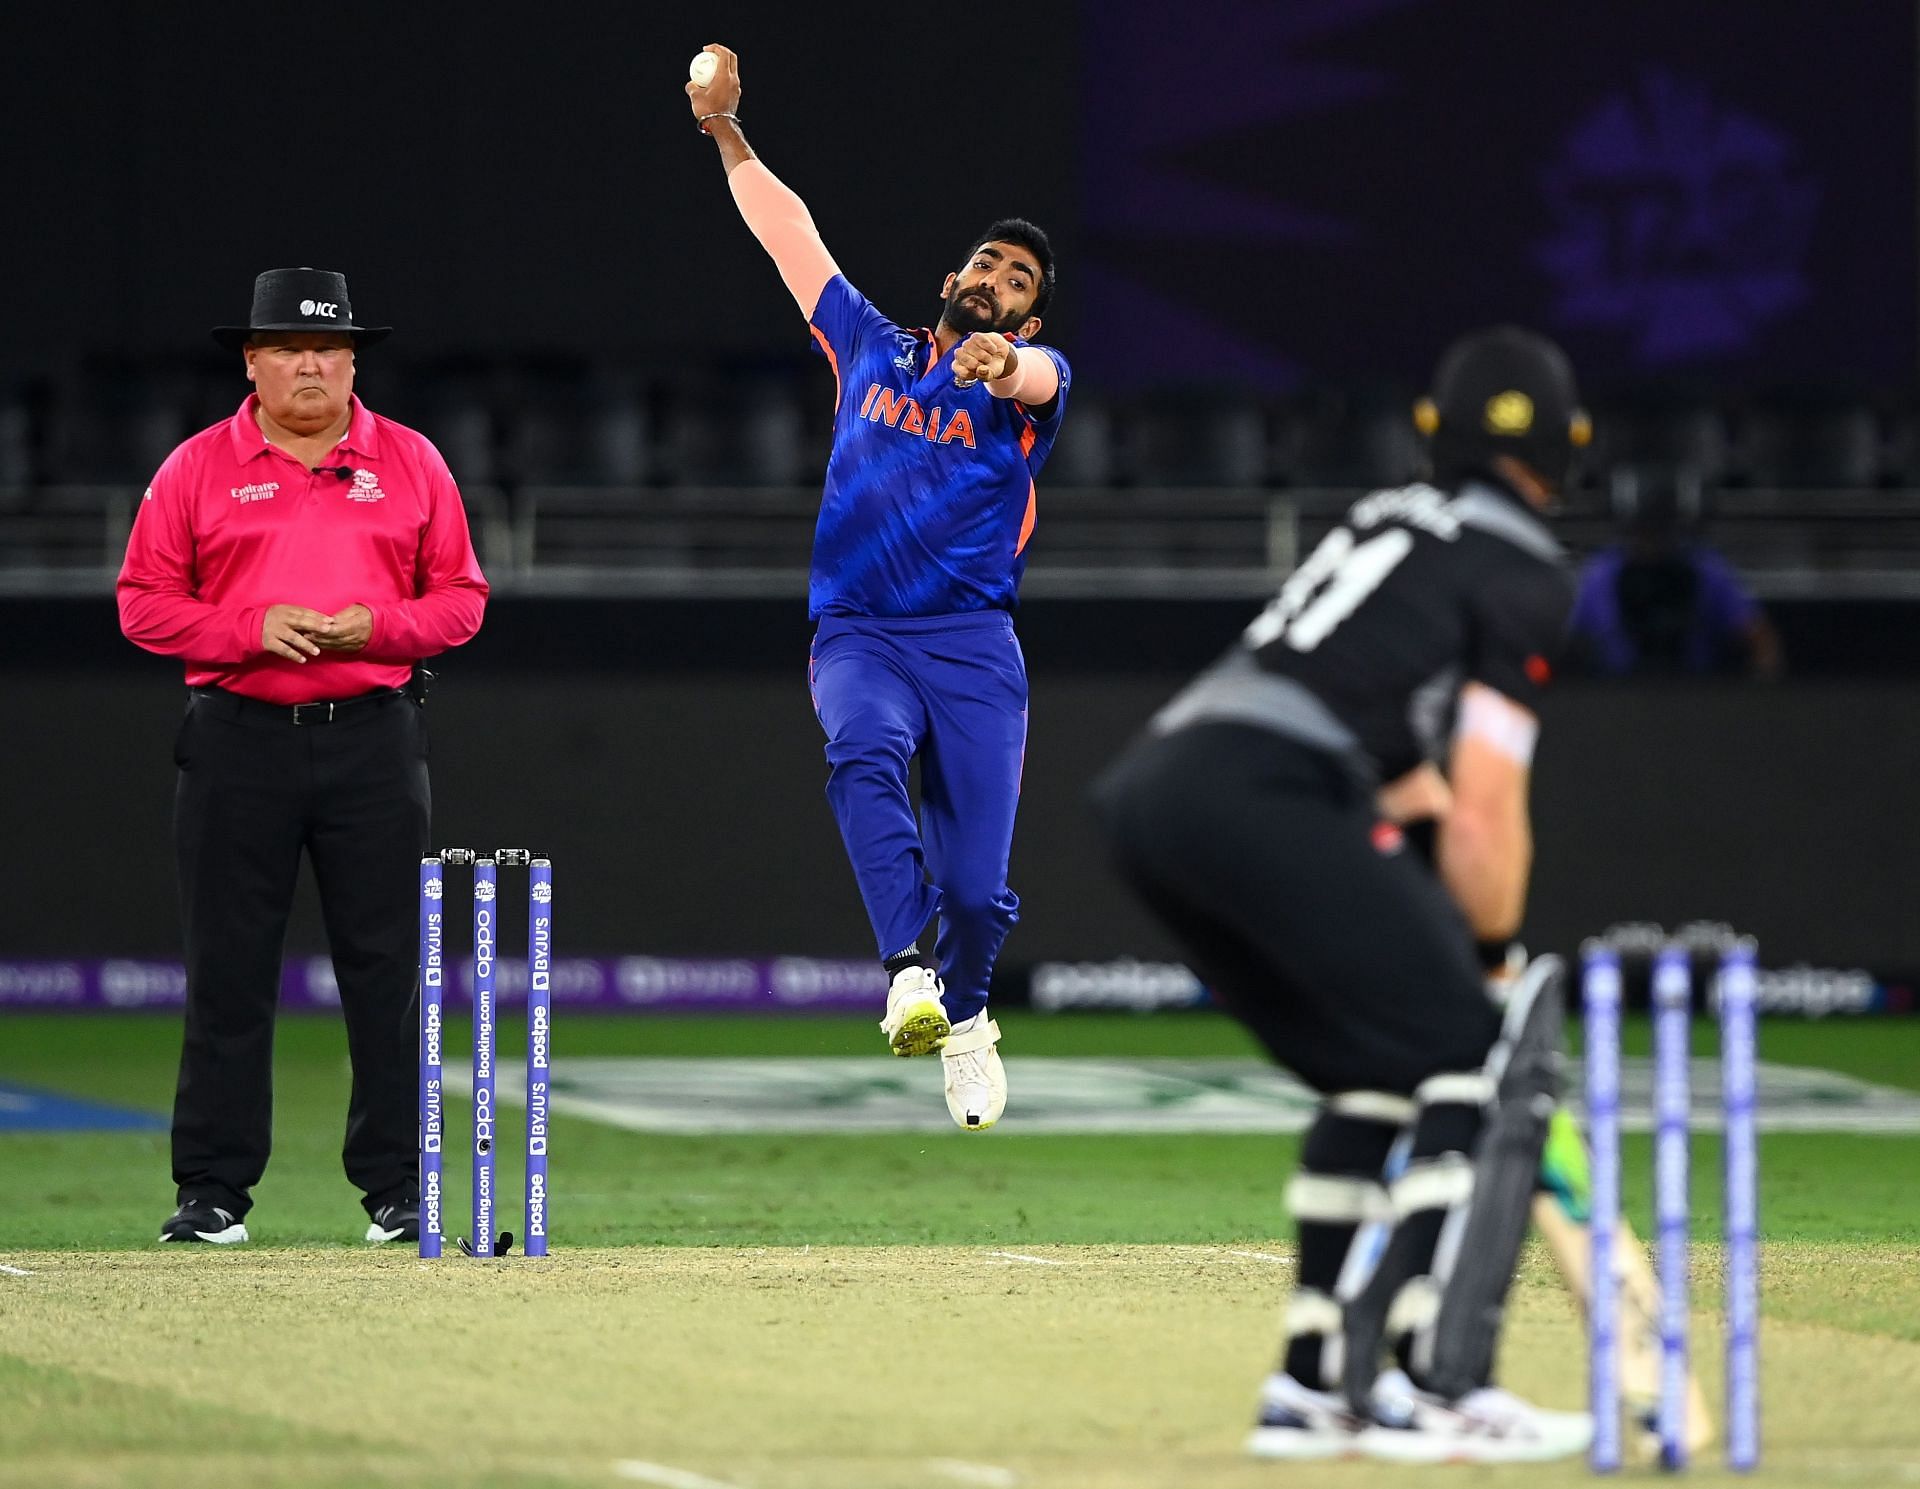 Jasprit Bumrah is the only Indian to have taken a wicket in the T20 World Cup 2021 so far. Pic: Getty Images